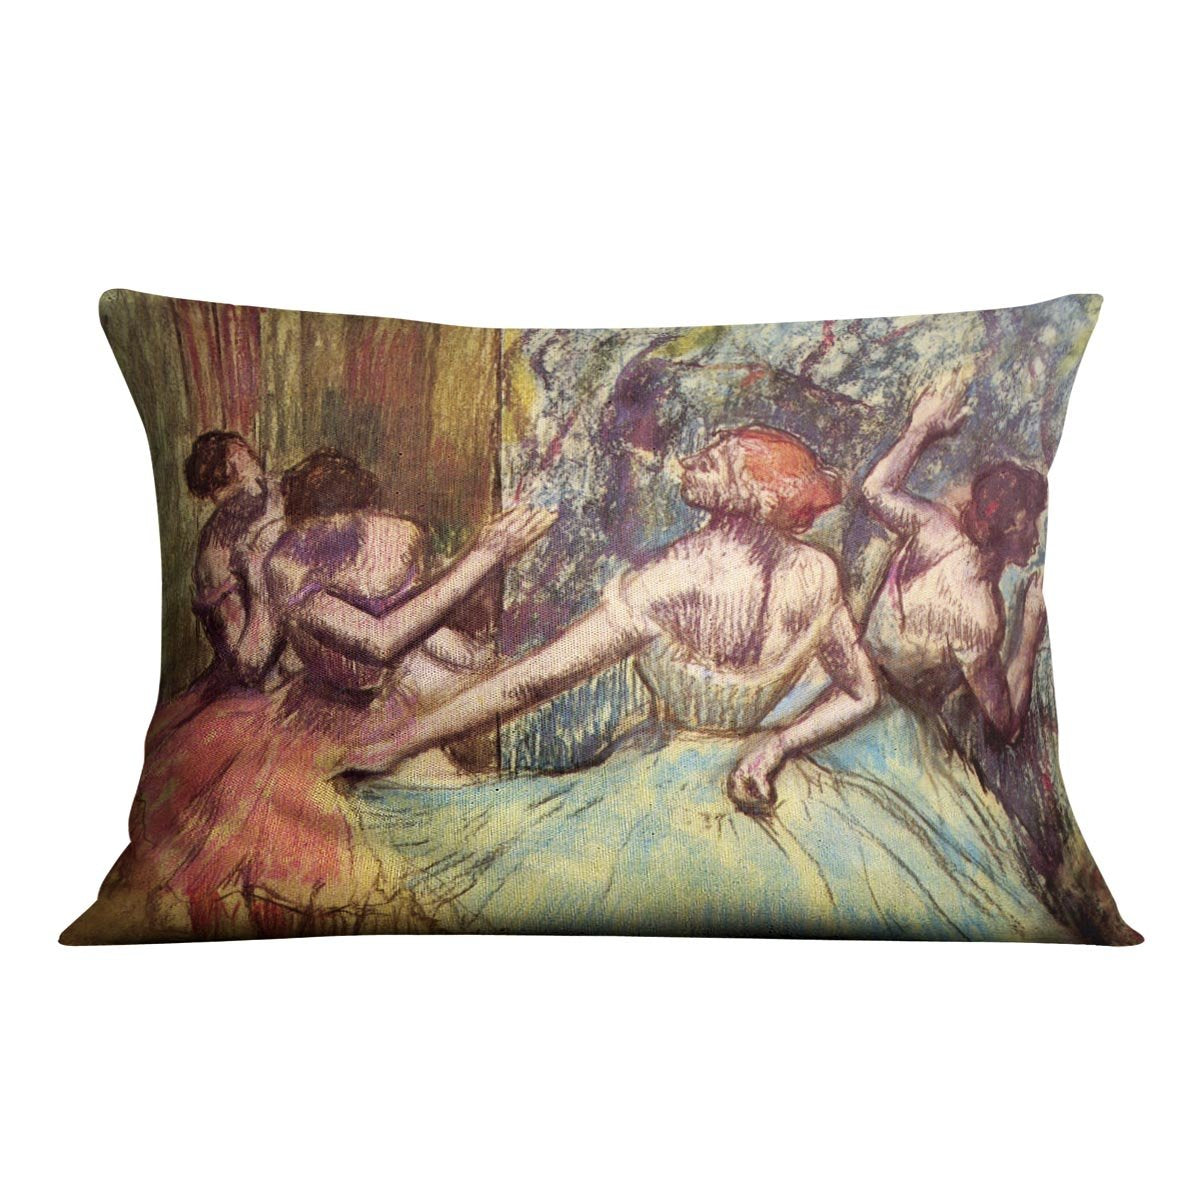 Four dancers behind the scenes 2 by Degas Cushion